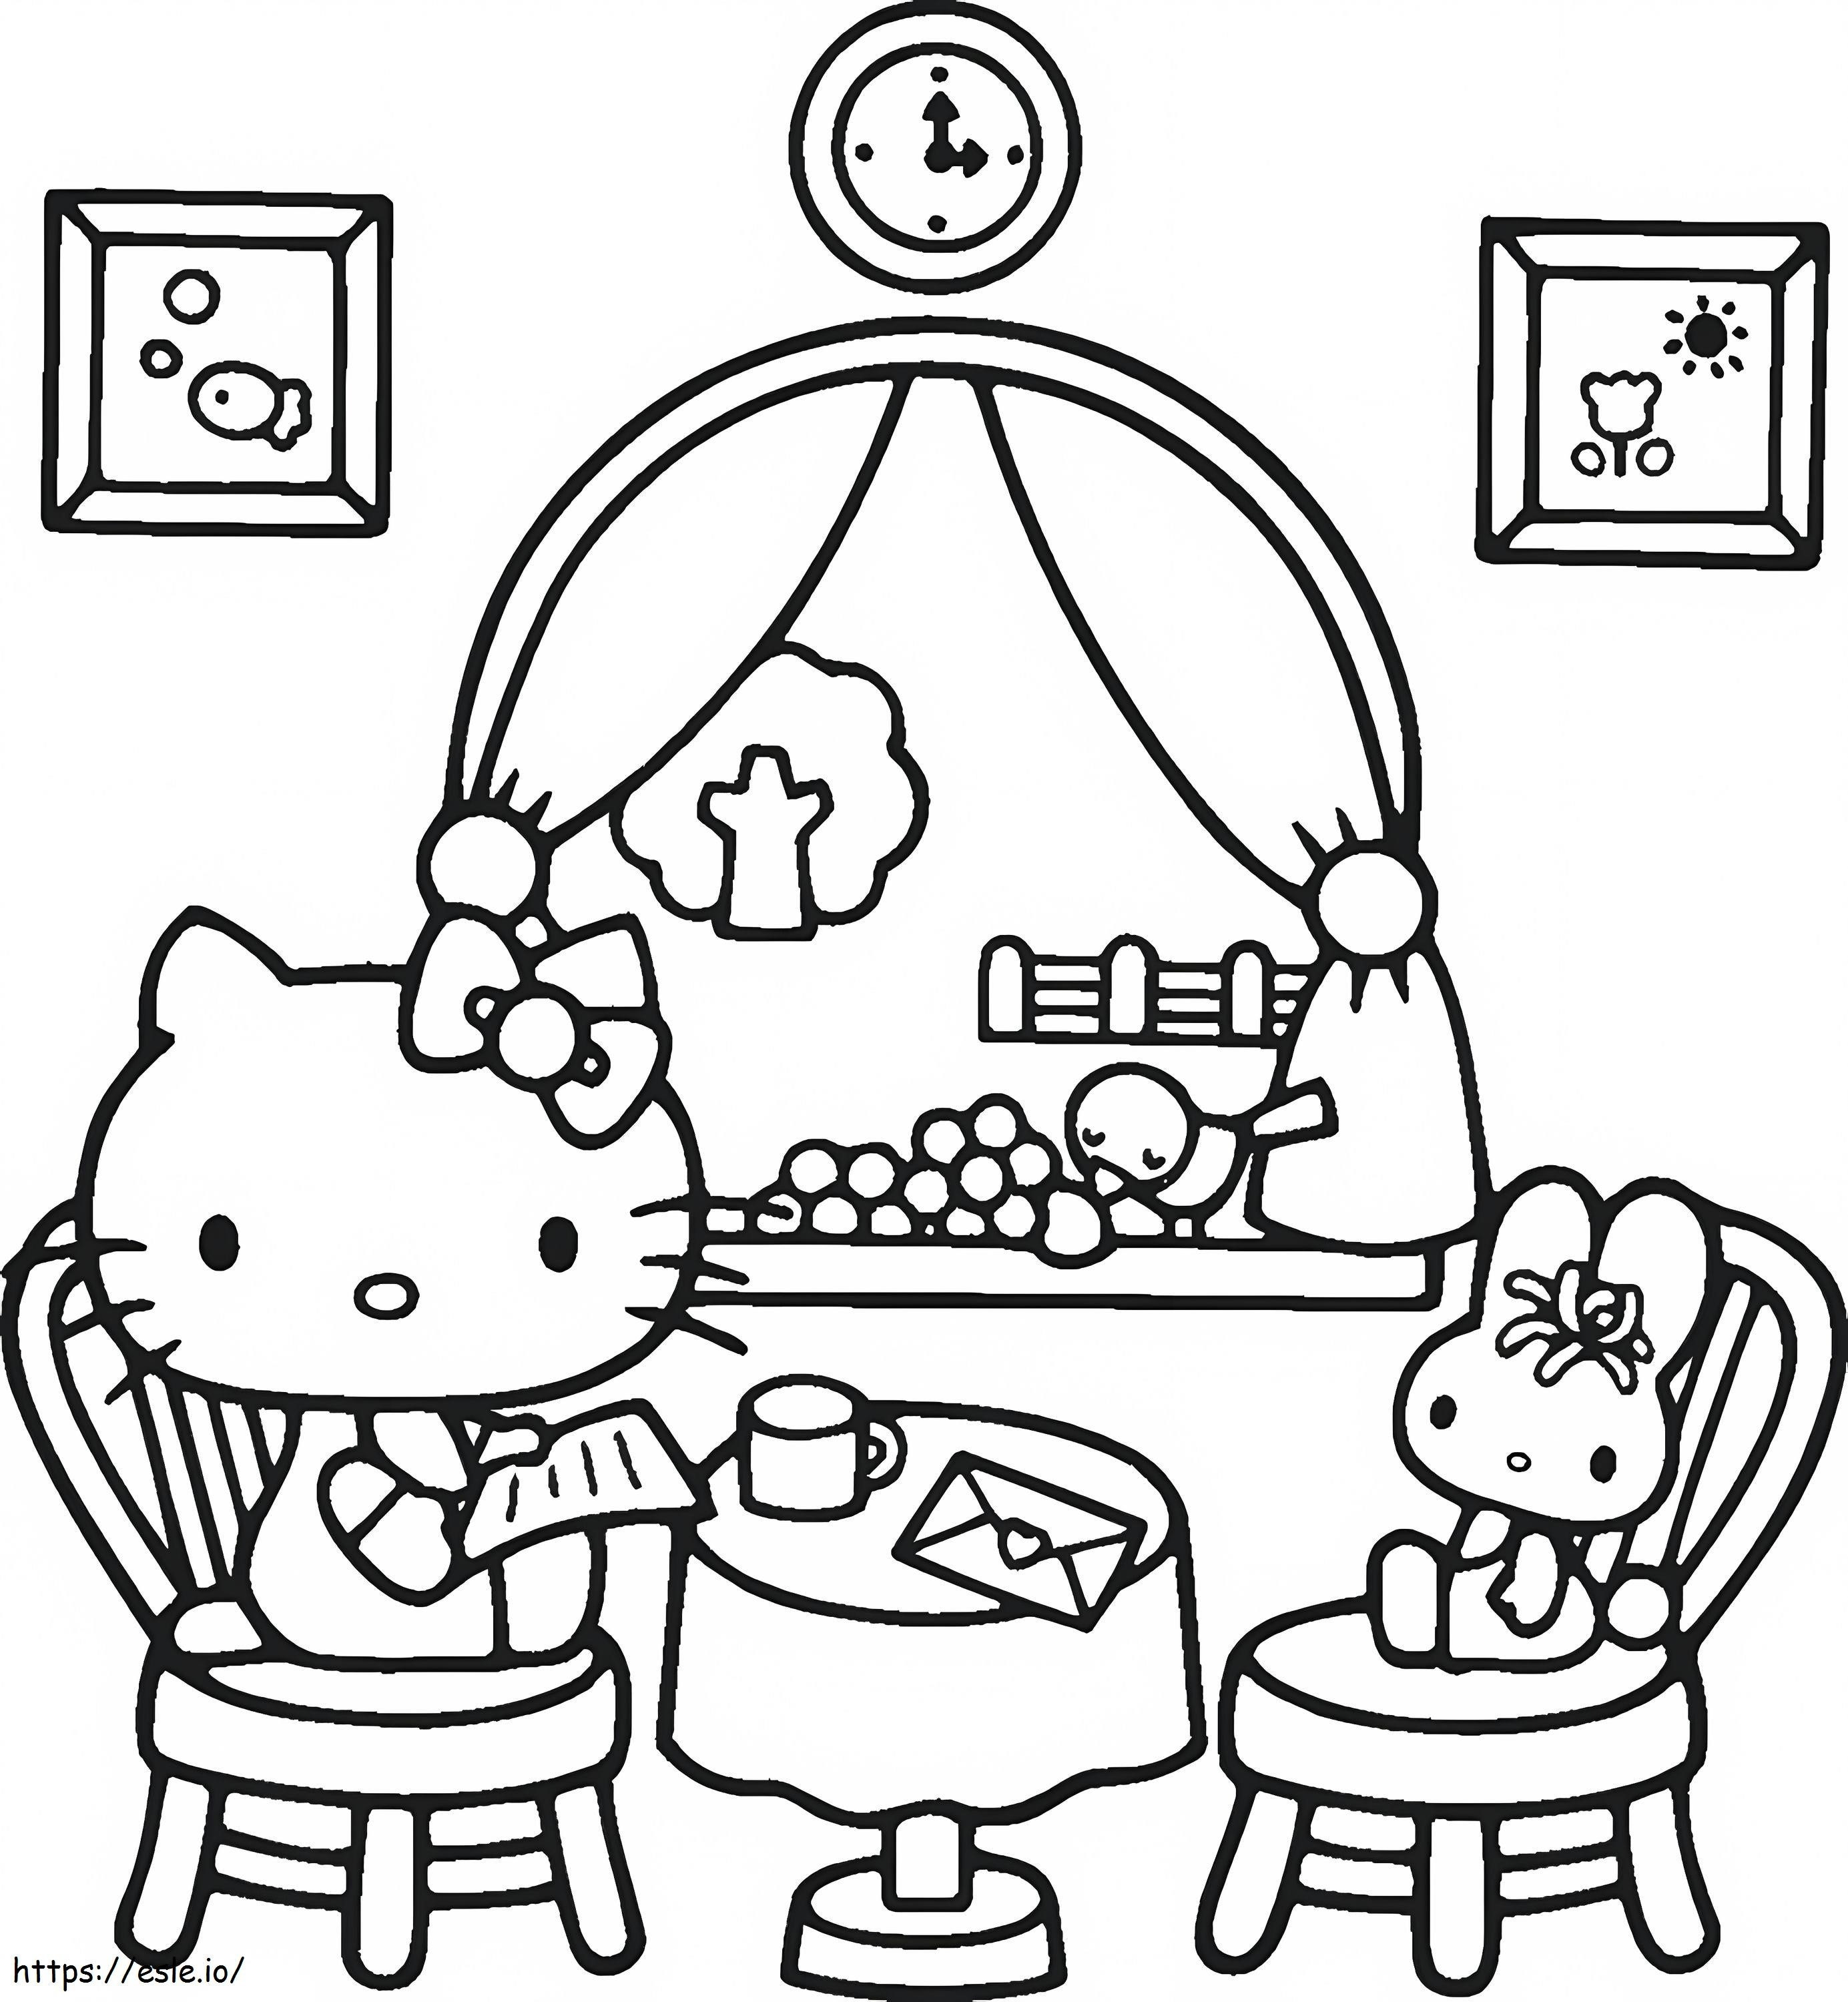 1539942005 How To Draw Free Hello Kitty Download coloring page